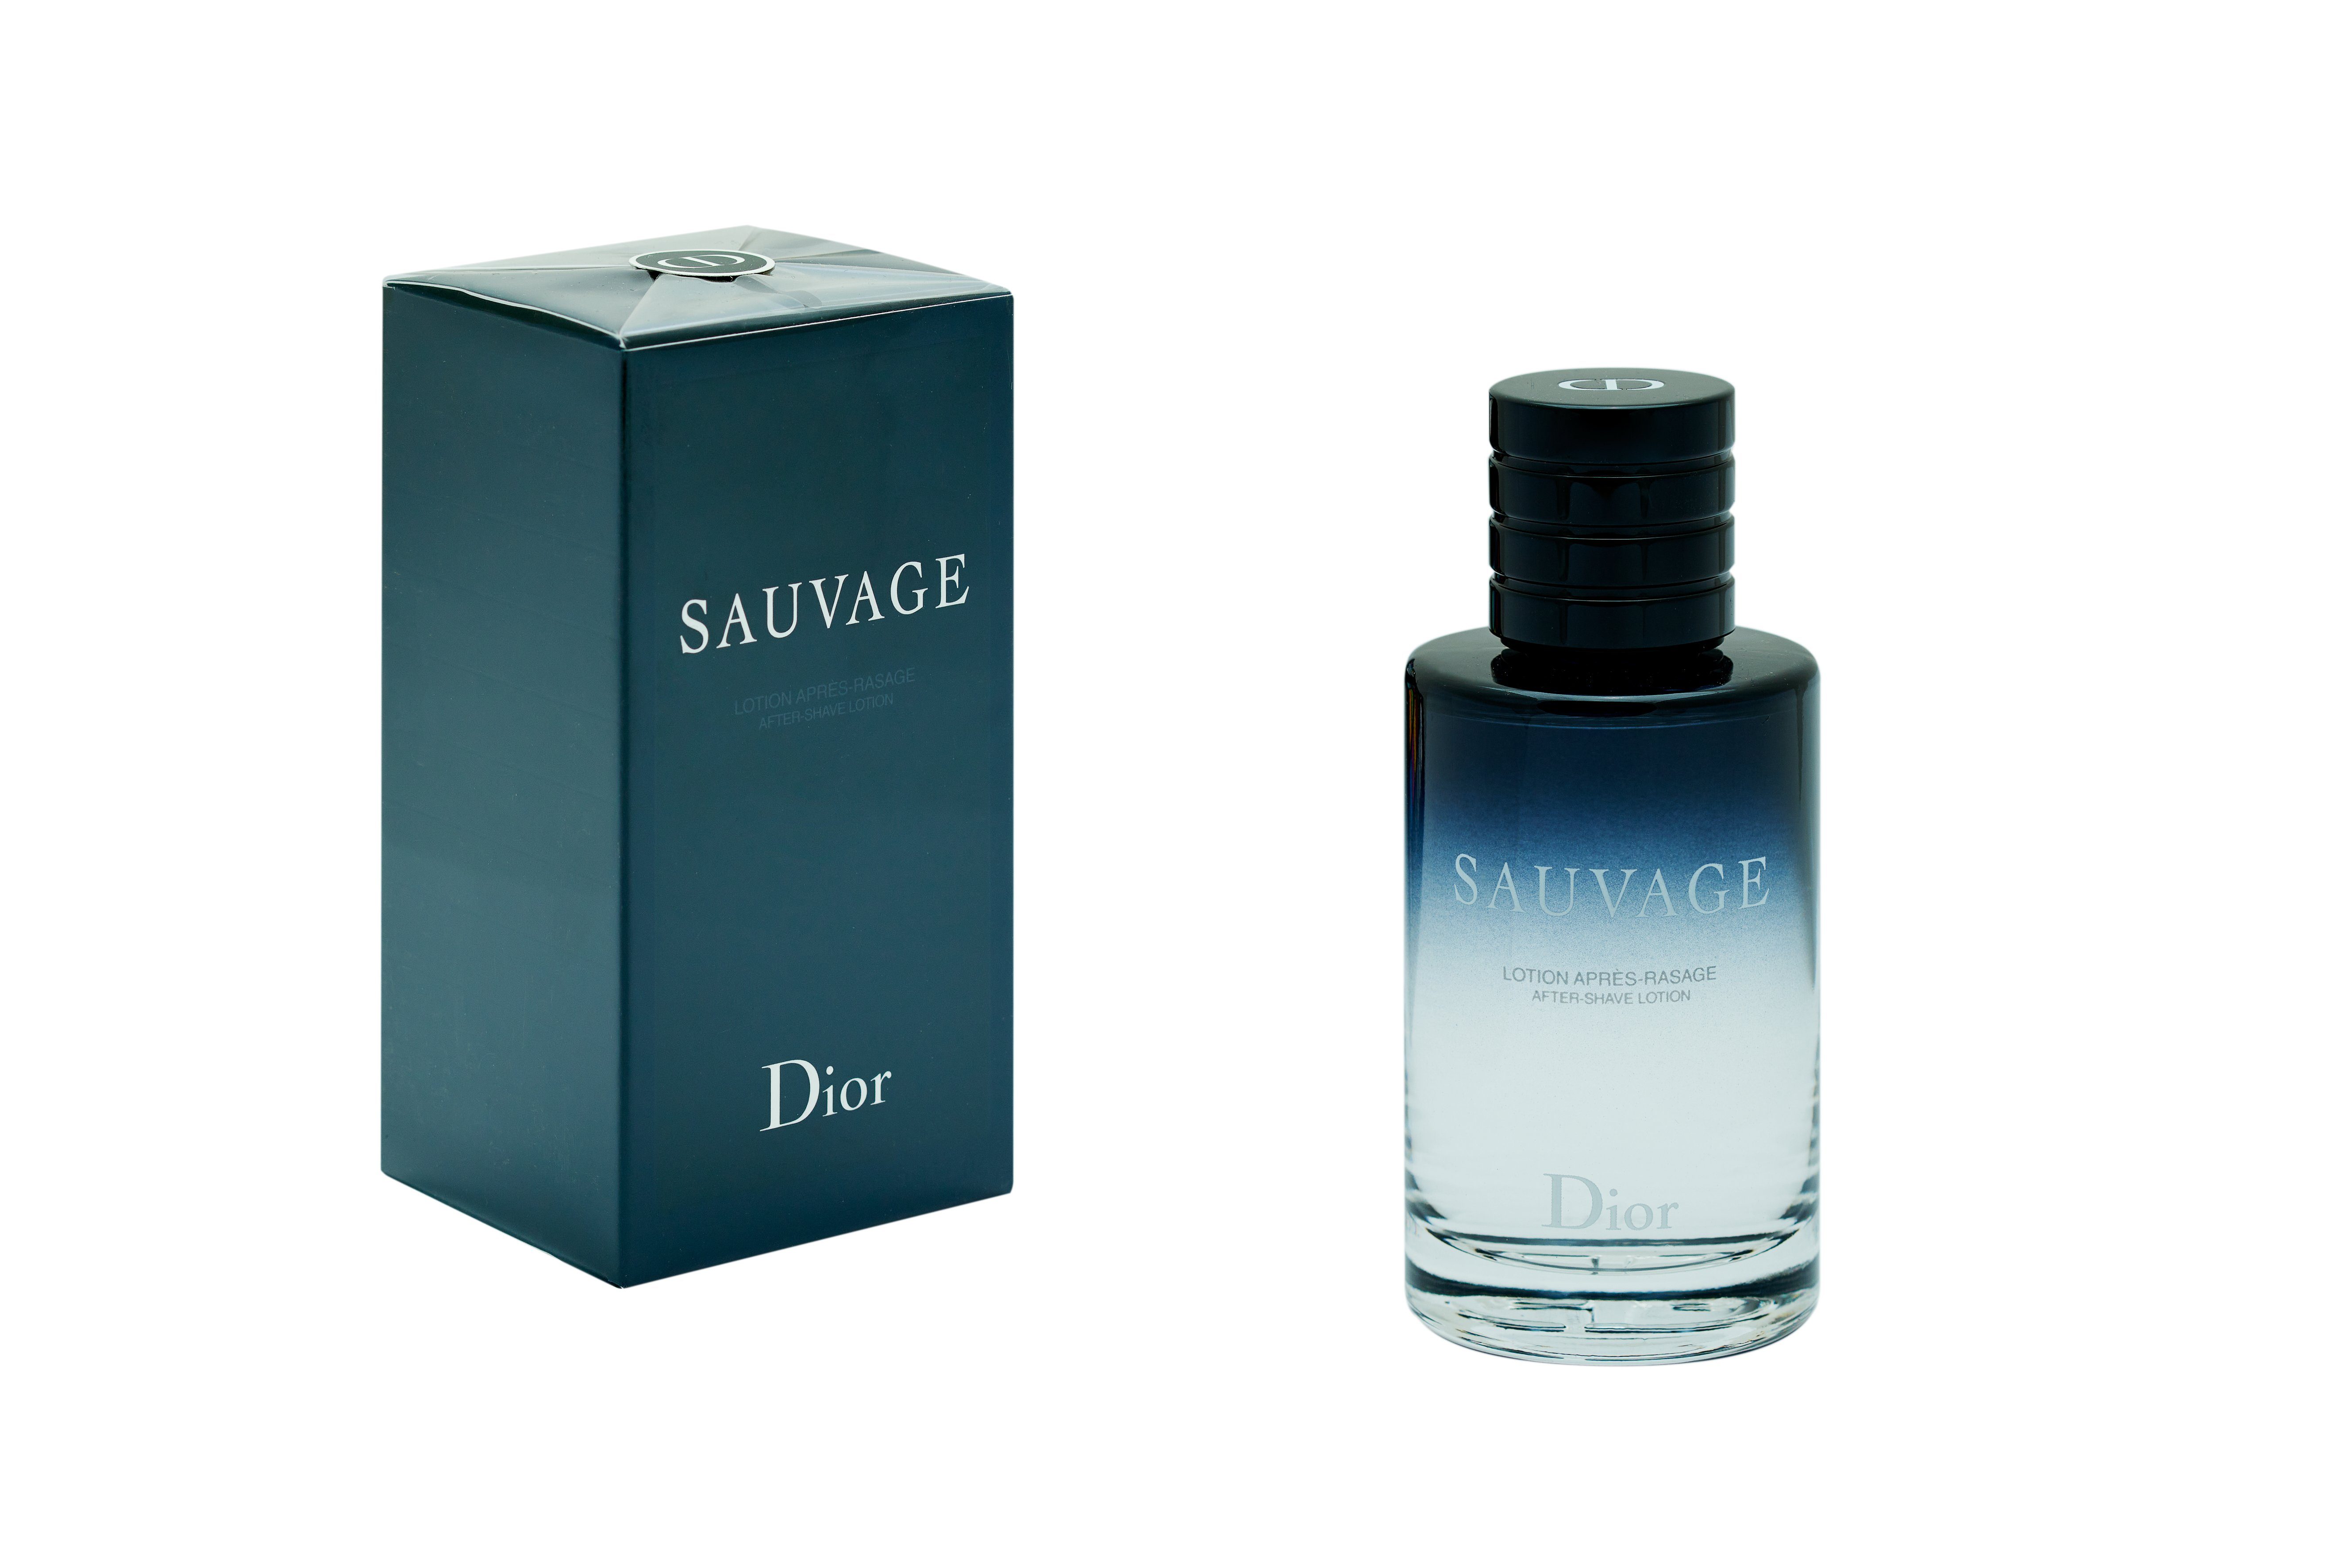 Dior Shave Dior After 100 Sauvage After Lotion ml Shave